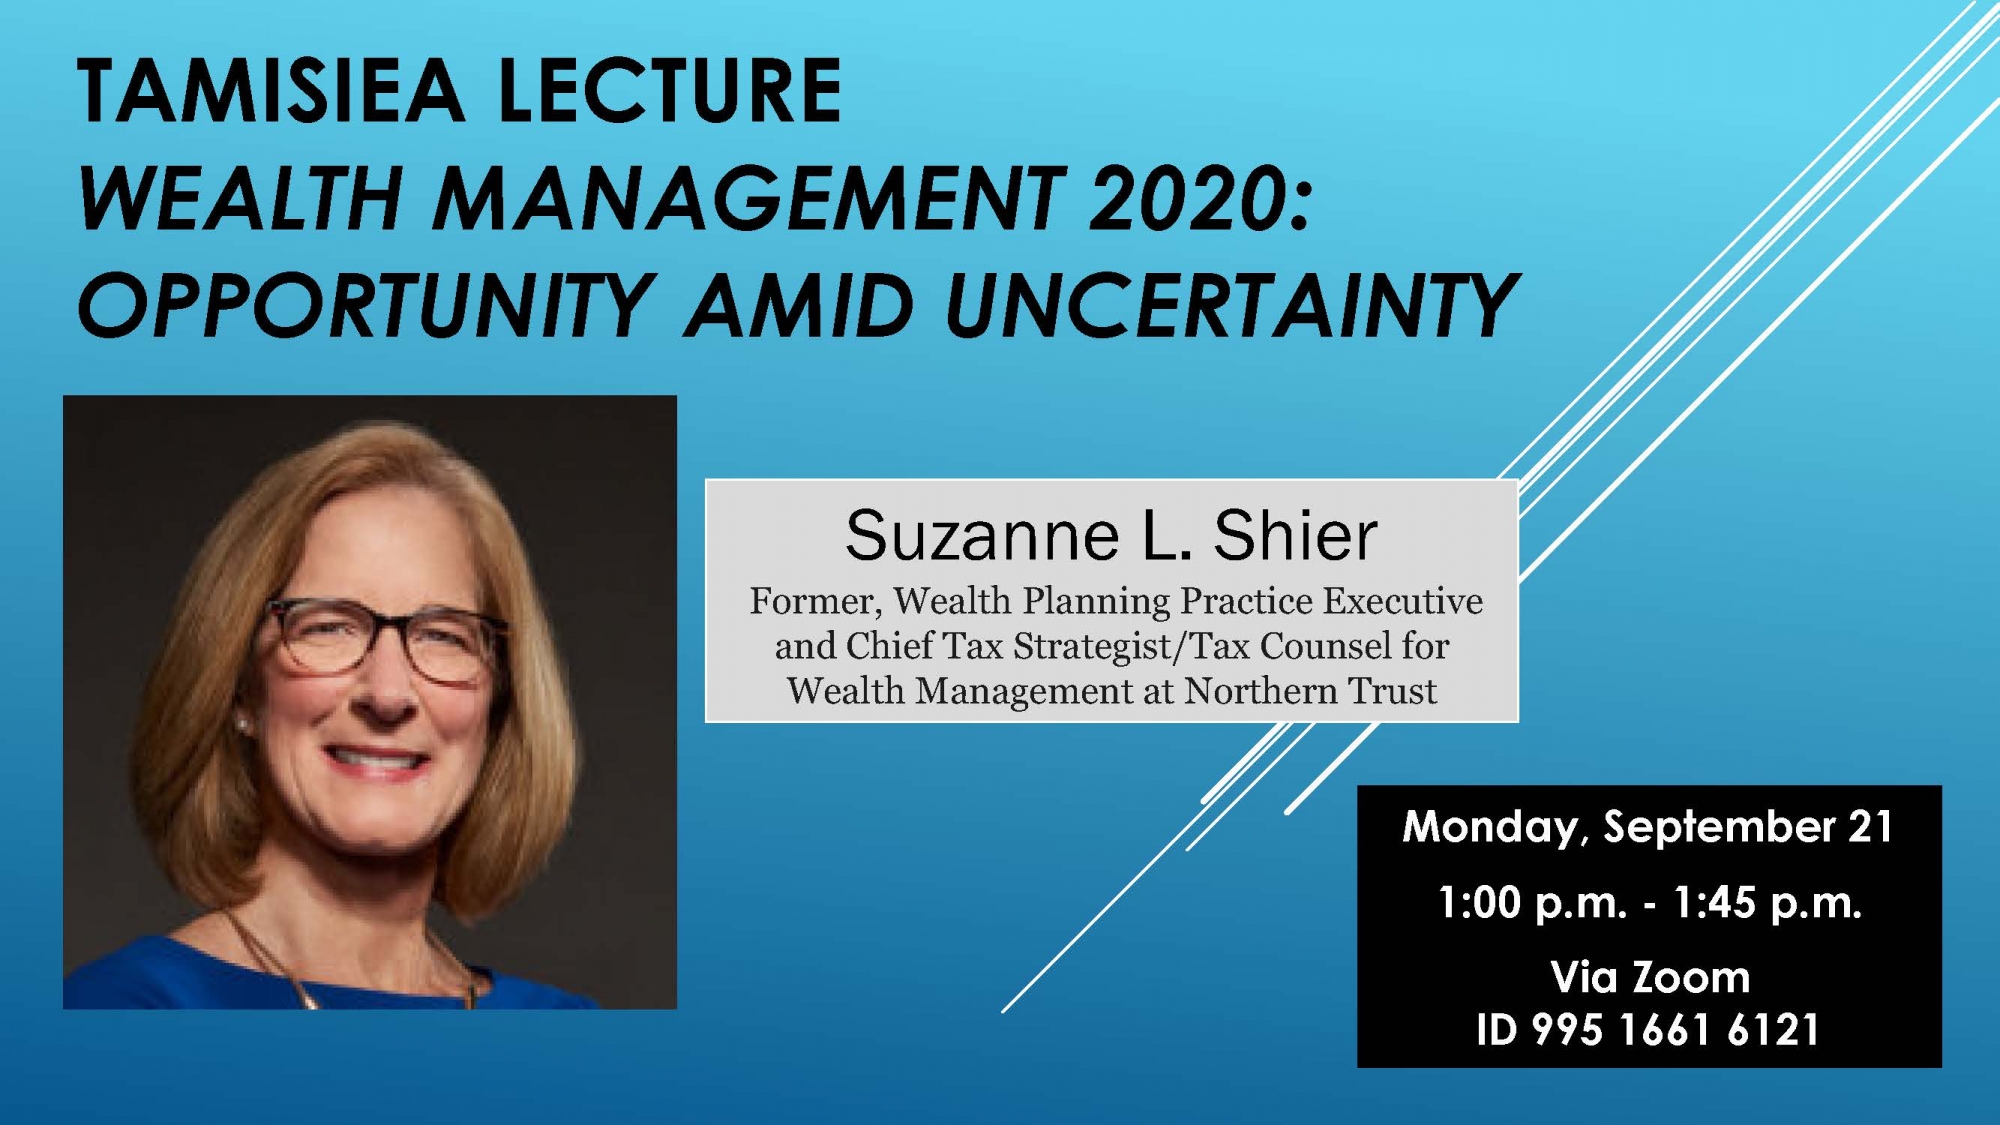 TAMISIEA LECTURE - September 21, 2020 - University of Iowa College of Law    WEALTH MANAGEMENT 2020: OPPORTUNITY AMID UNCERTAINTY    Speaker: Suzanne L. Shier    Former, Wealth Planning Practice Executive and Chief Tax Strategist/Tax Counsel for Wealth Management at Northern Trust    Monday, September 21    1:00 p.m. -1:45 p.m.    Via Zoom ID 995 1661 6121